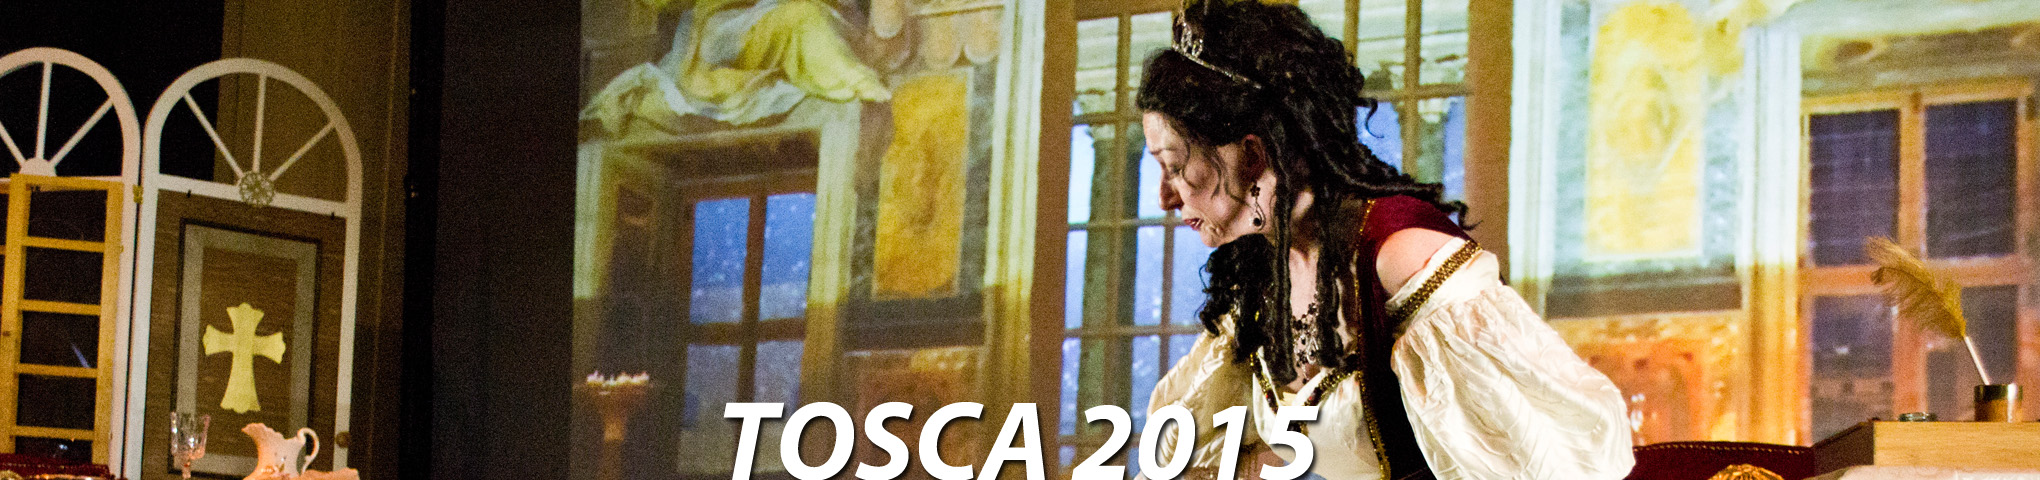 synopsis of tosca opera